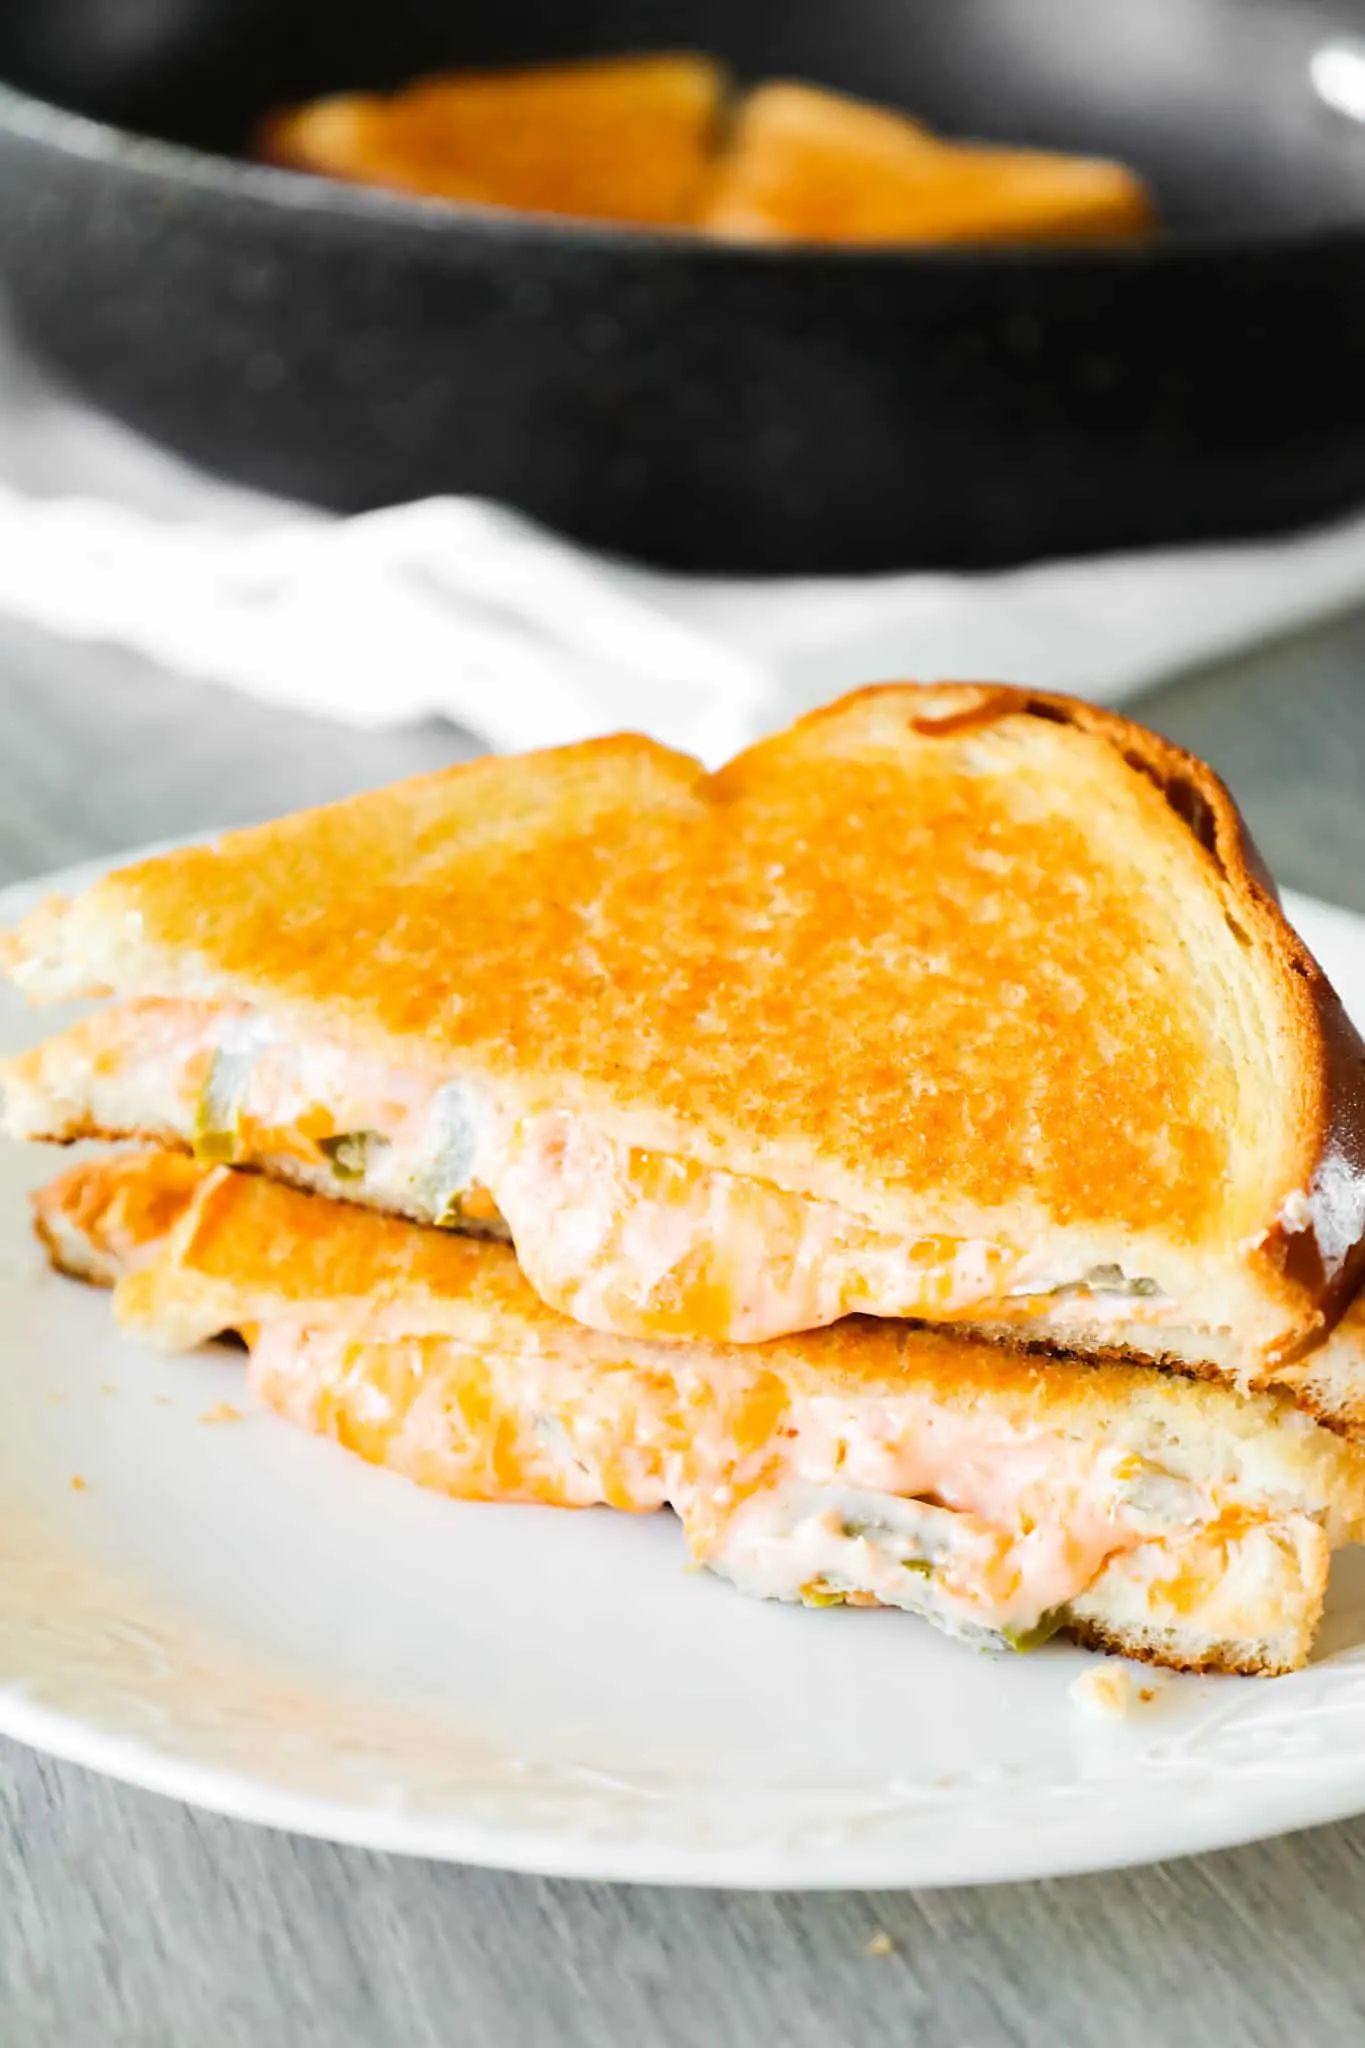 Jalapeno Popper Grilled Cheese is an easy lunch or dinner recipe loaded with shredded cheddar cheese, cream cheese, sour cream and jalapeno slices.